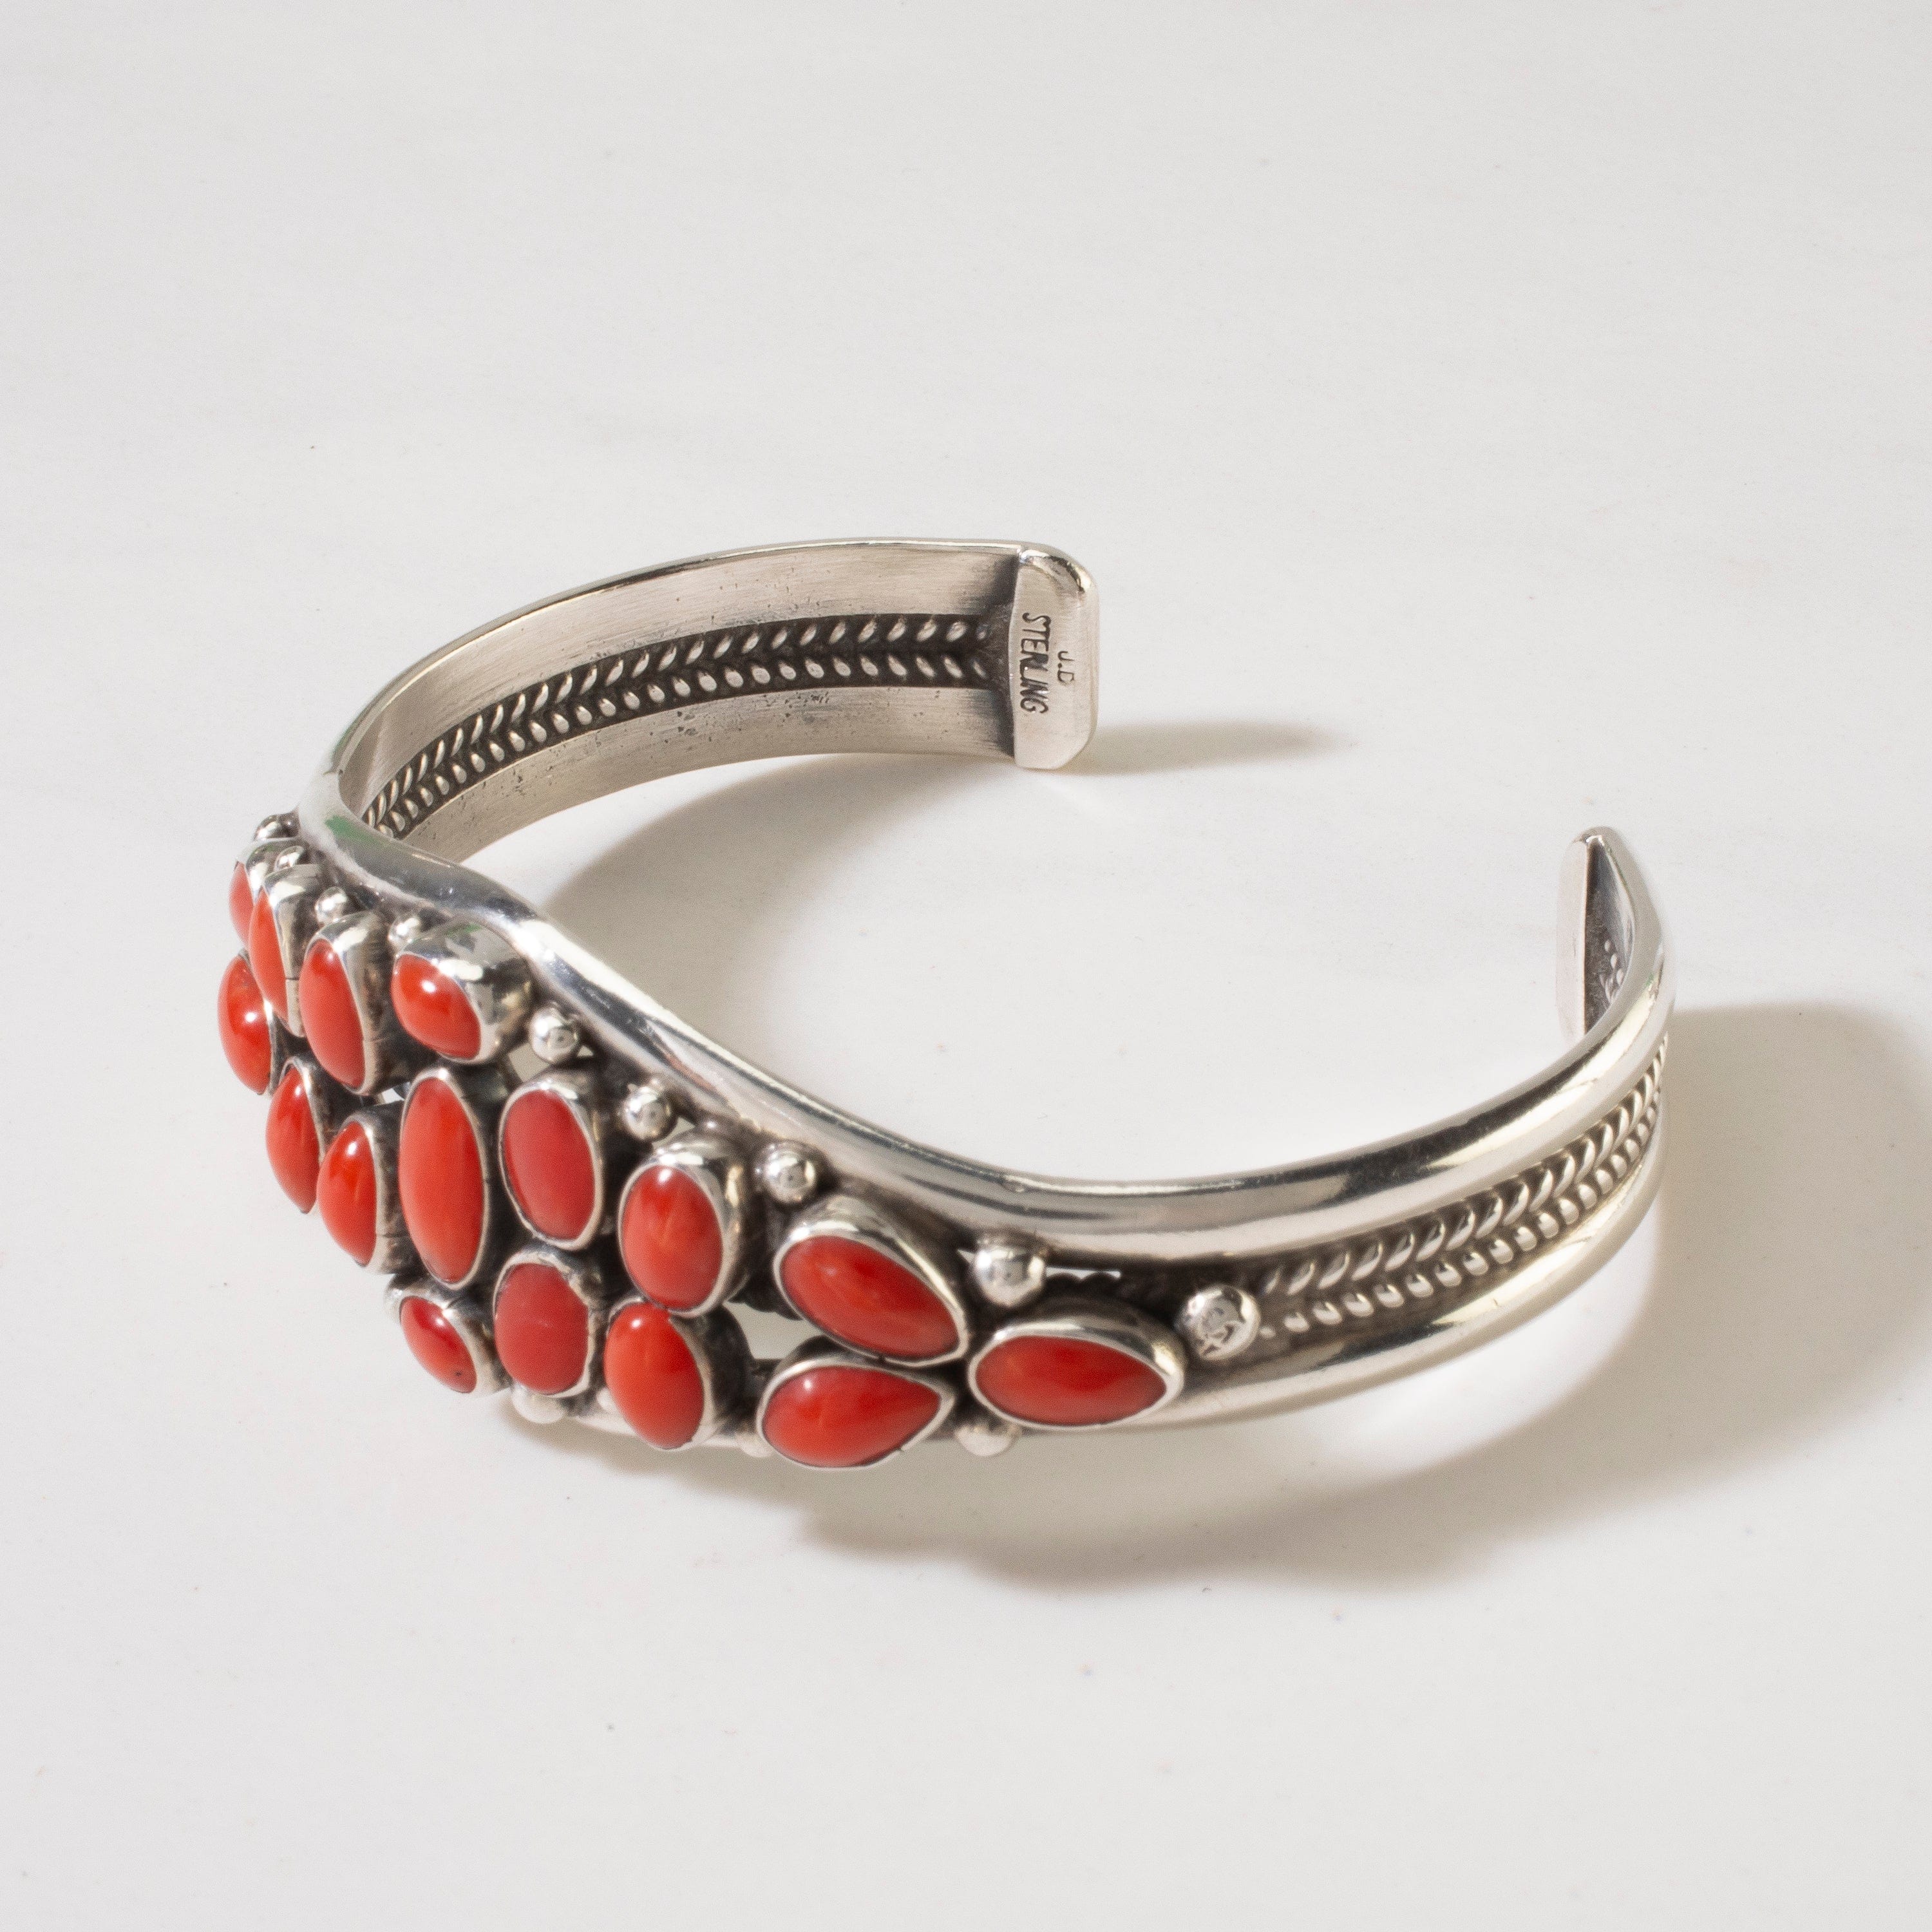 Kalifano Native American Jewelry Red Coral Navajo USA Native American Made 925 Sterling Silver Cuff NAB2400.016